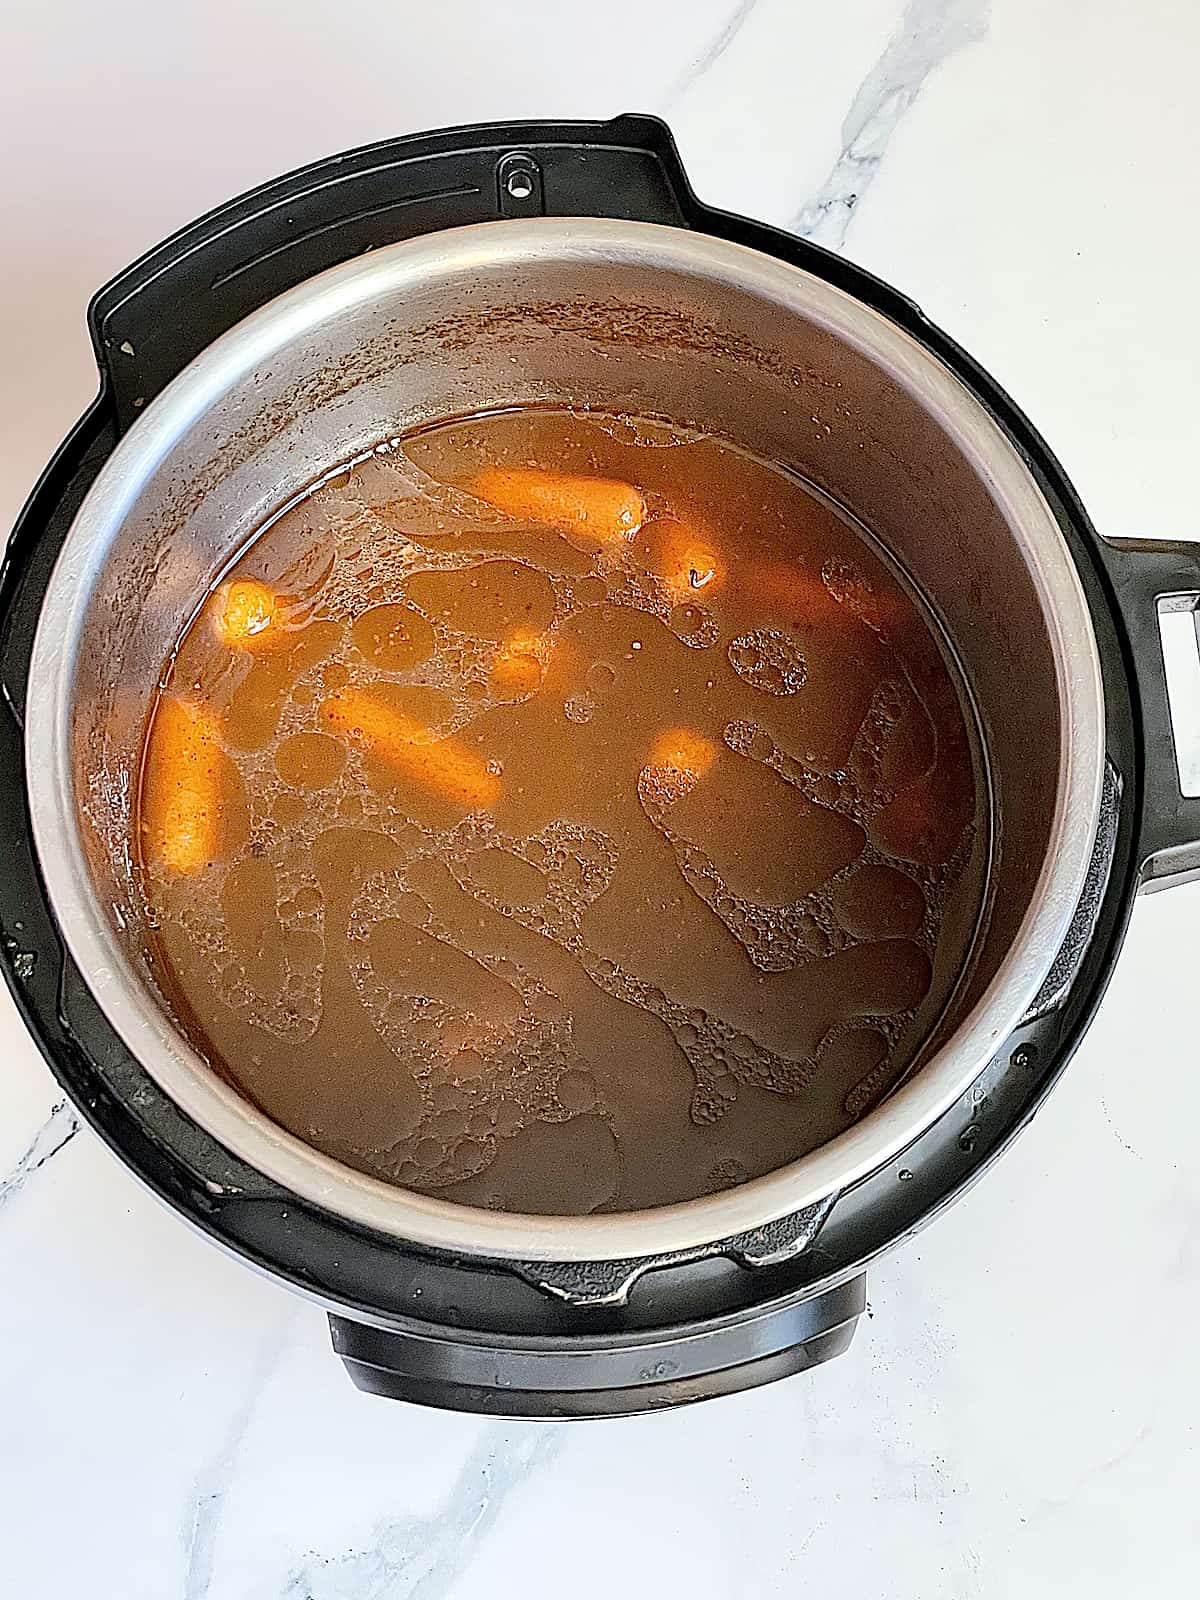 vegetables in lamb broth in the instant pot